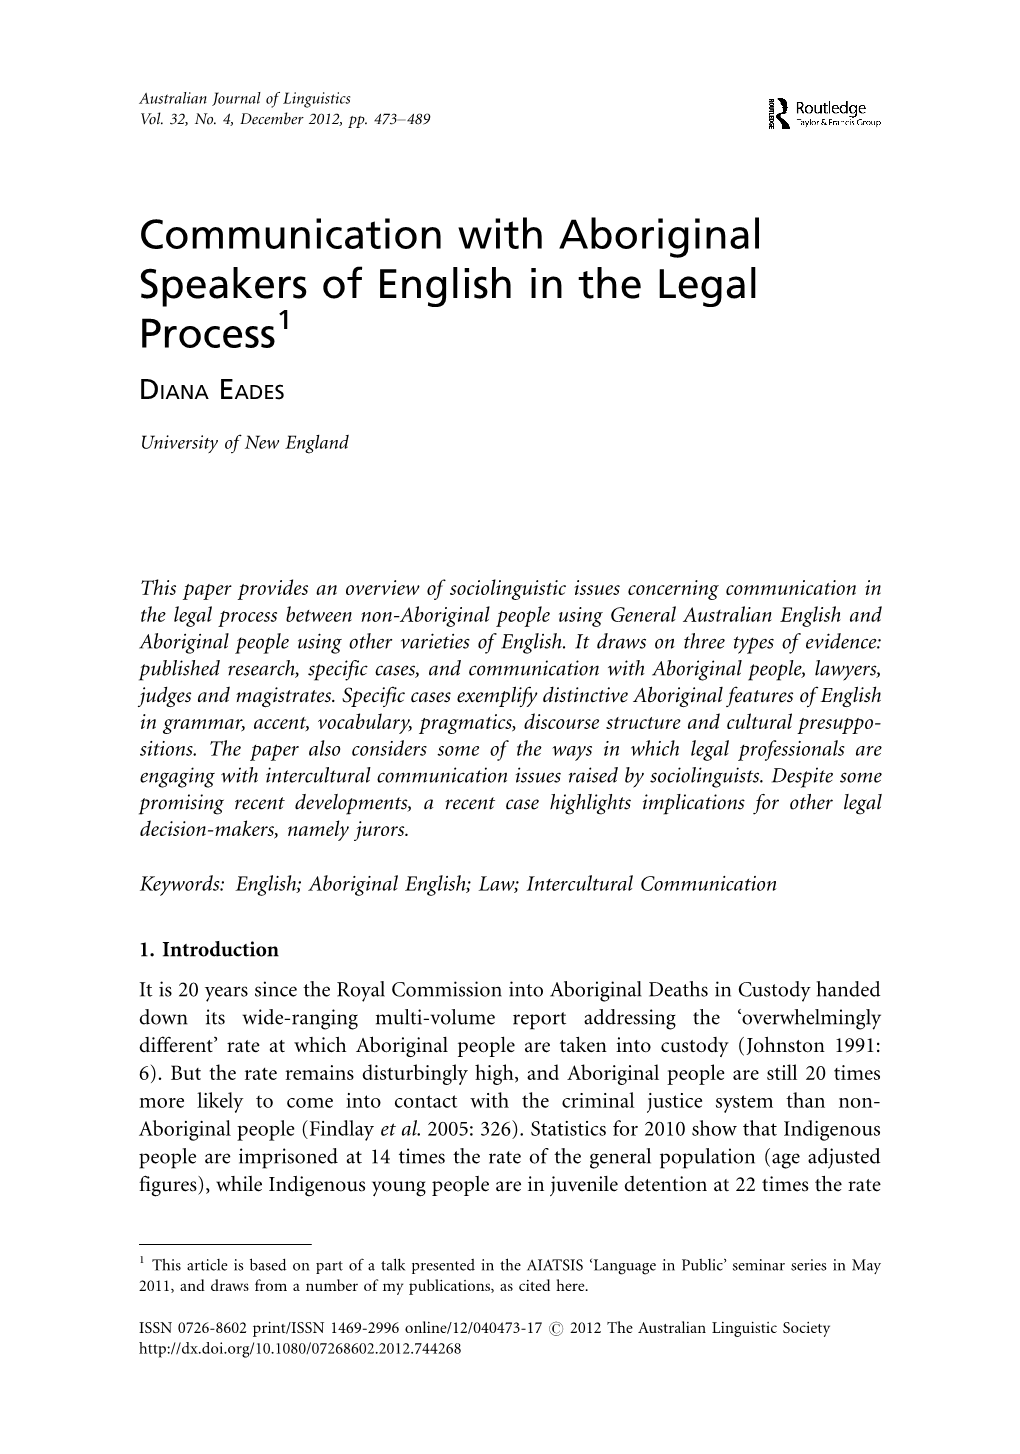 Communication with Aboriginal Speakers of English in the Legal Process1